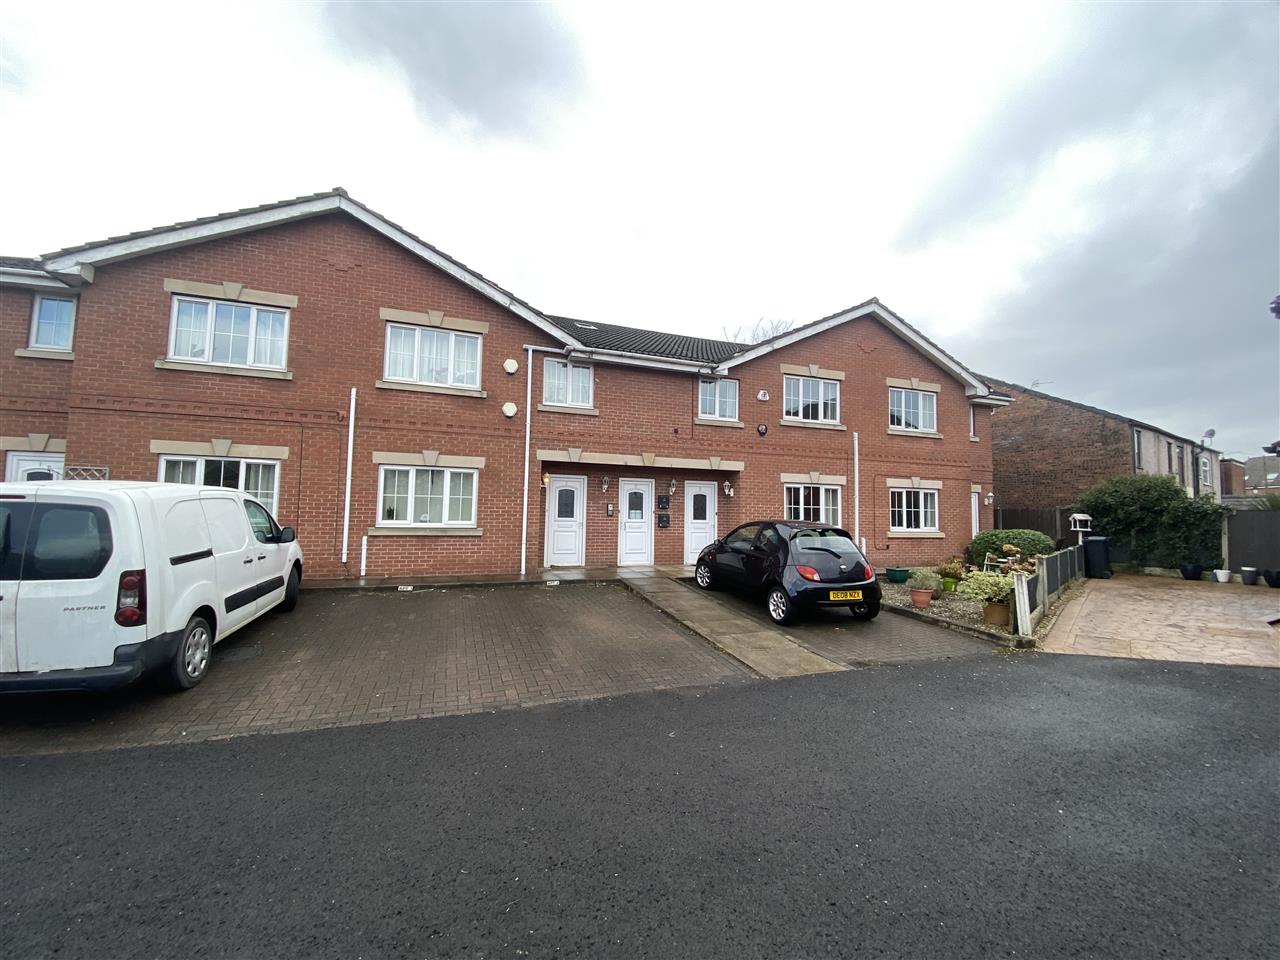 2 bed apartment to rent in Alden Court, Westhoughton, BL5